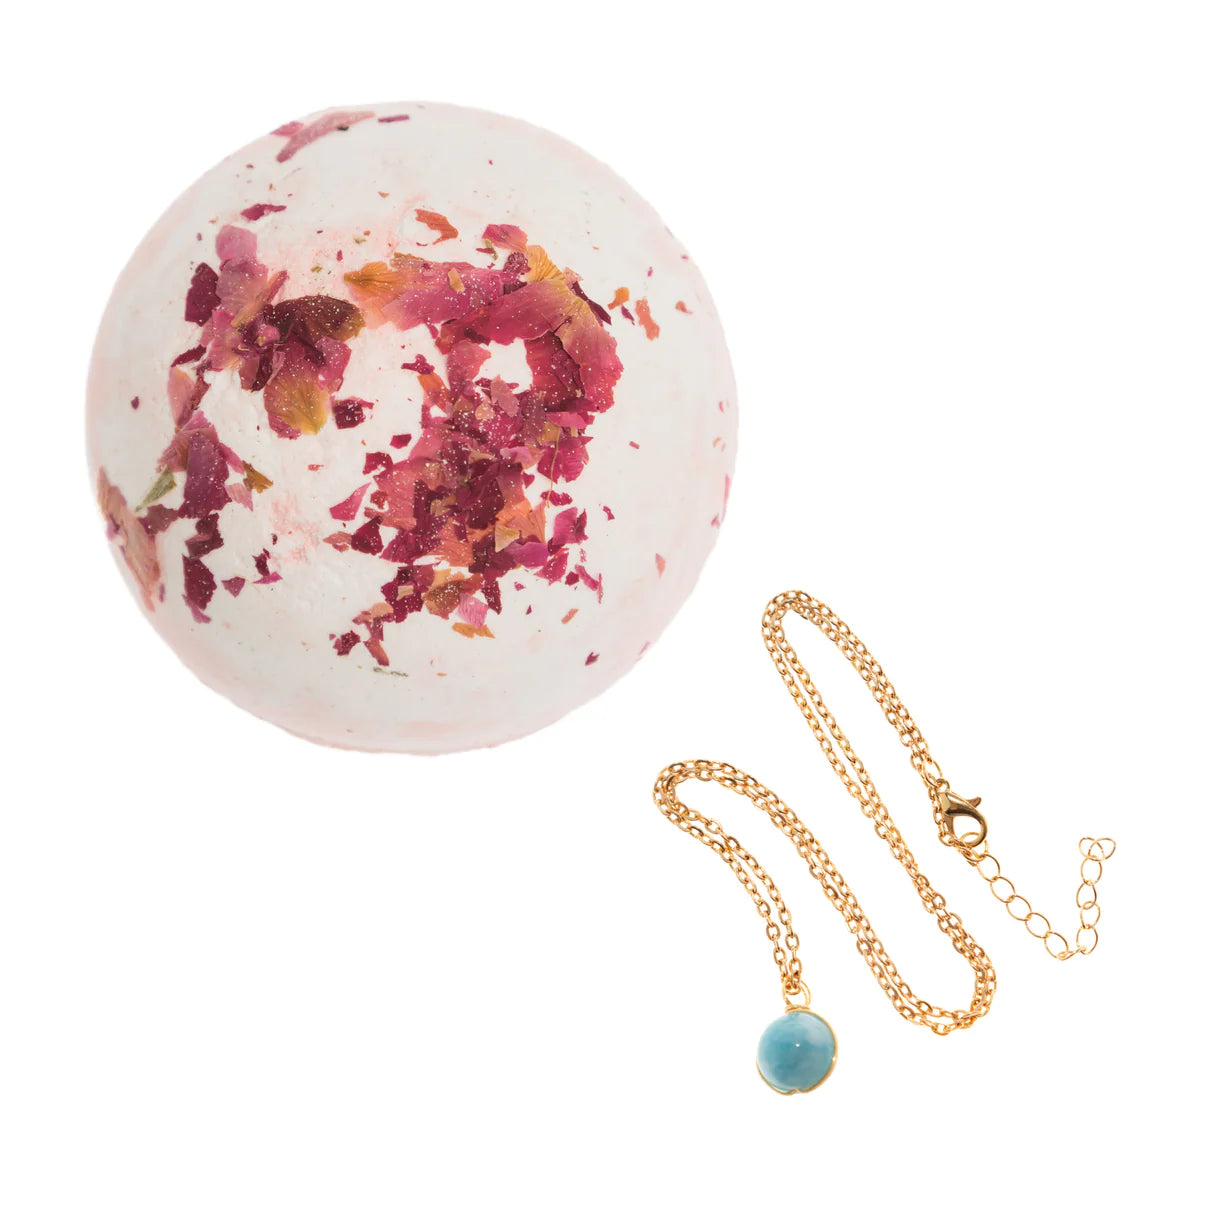 Laced with Kindness Bath Bomb Surprise Necklace